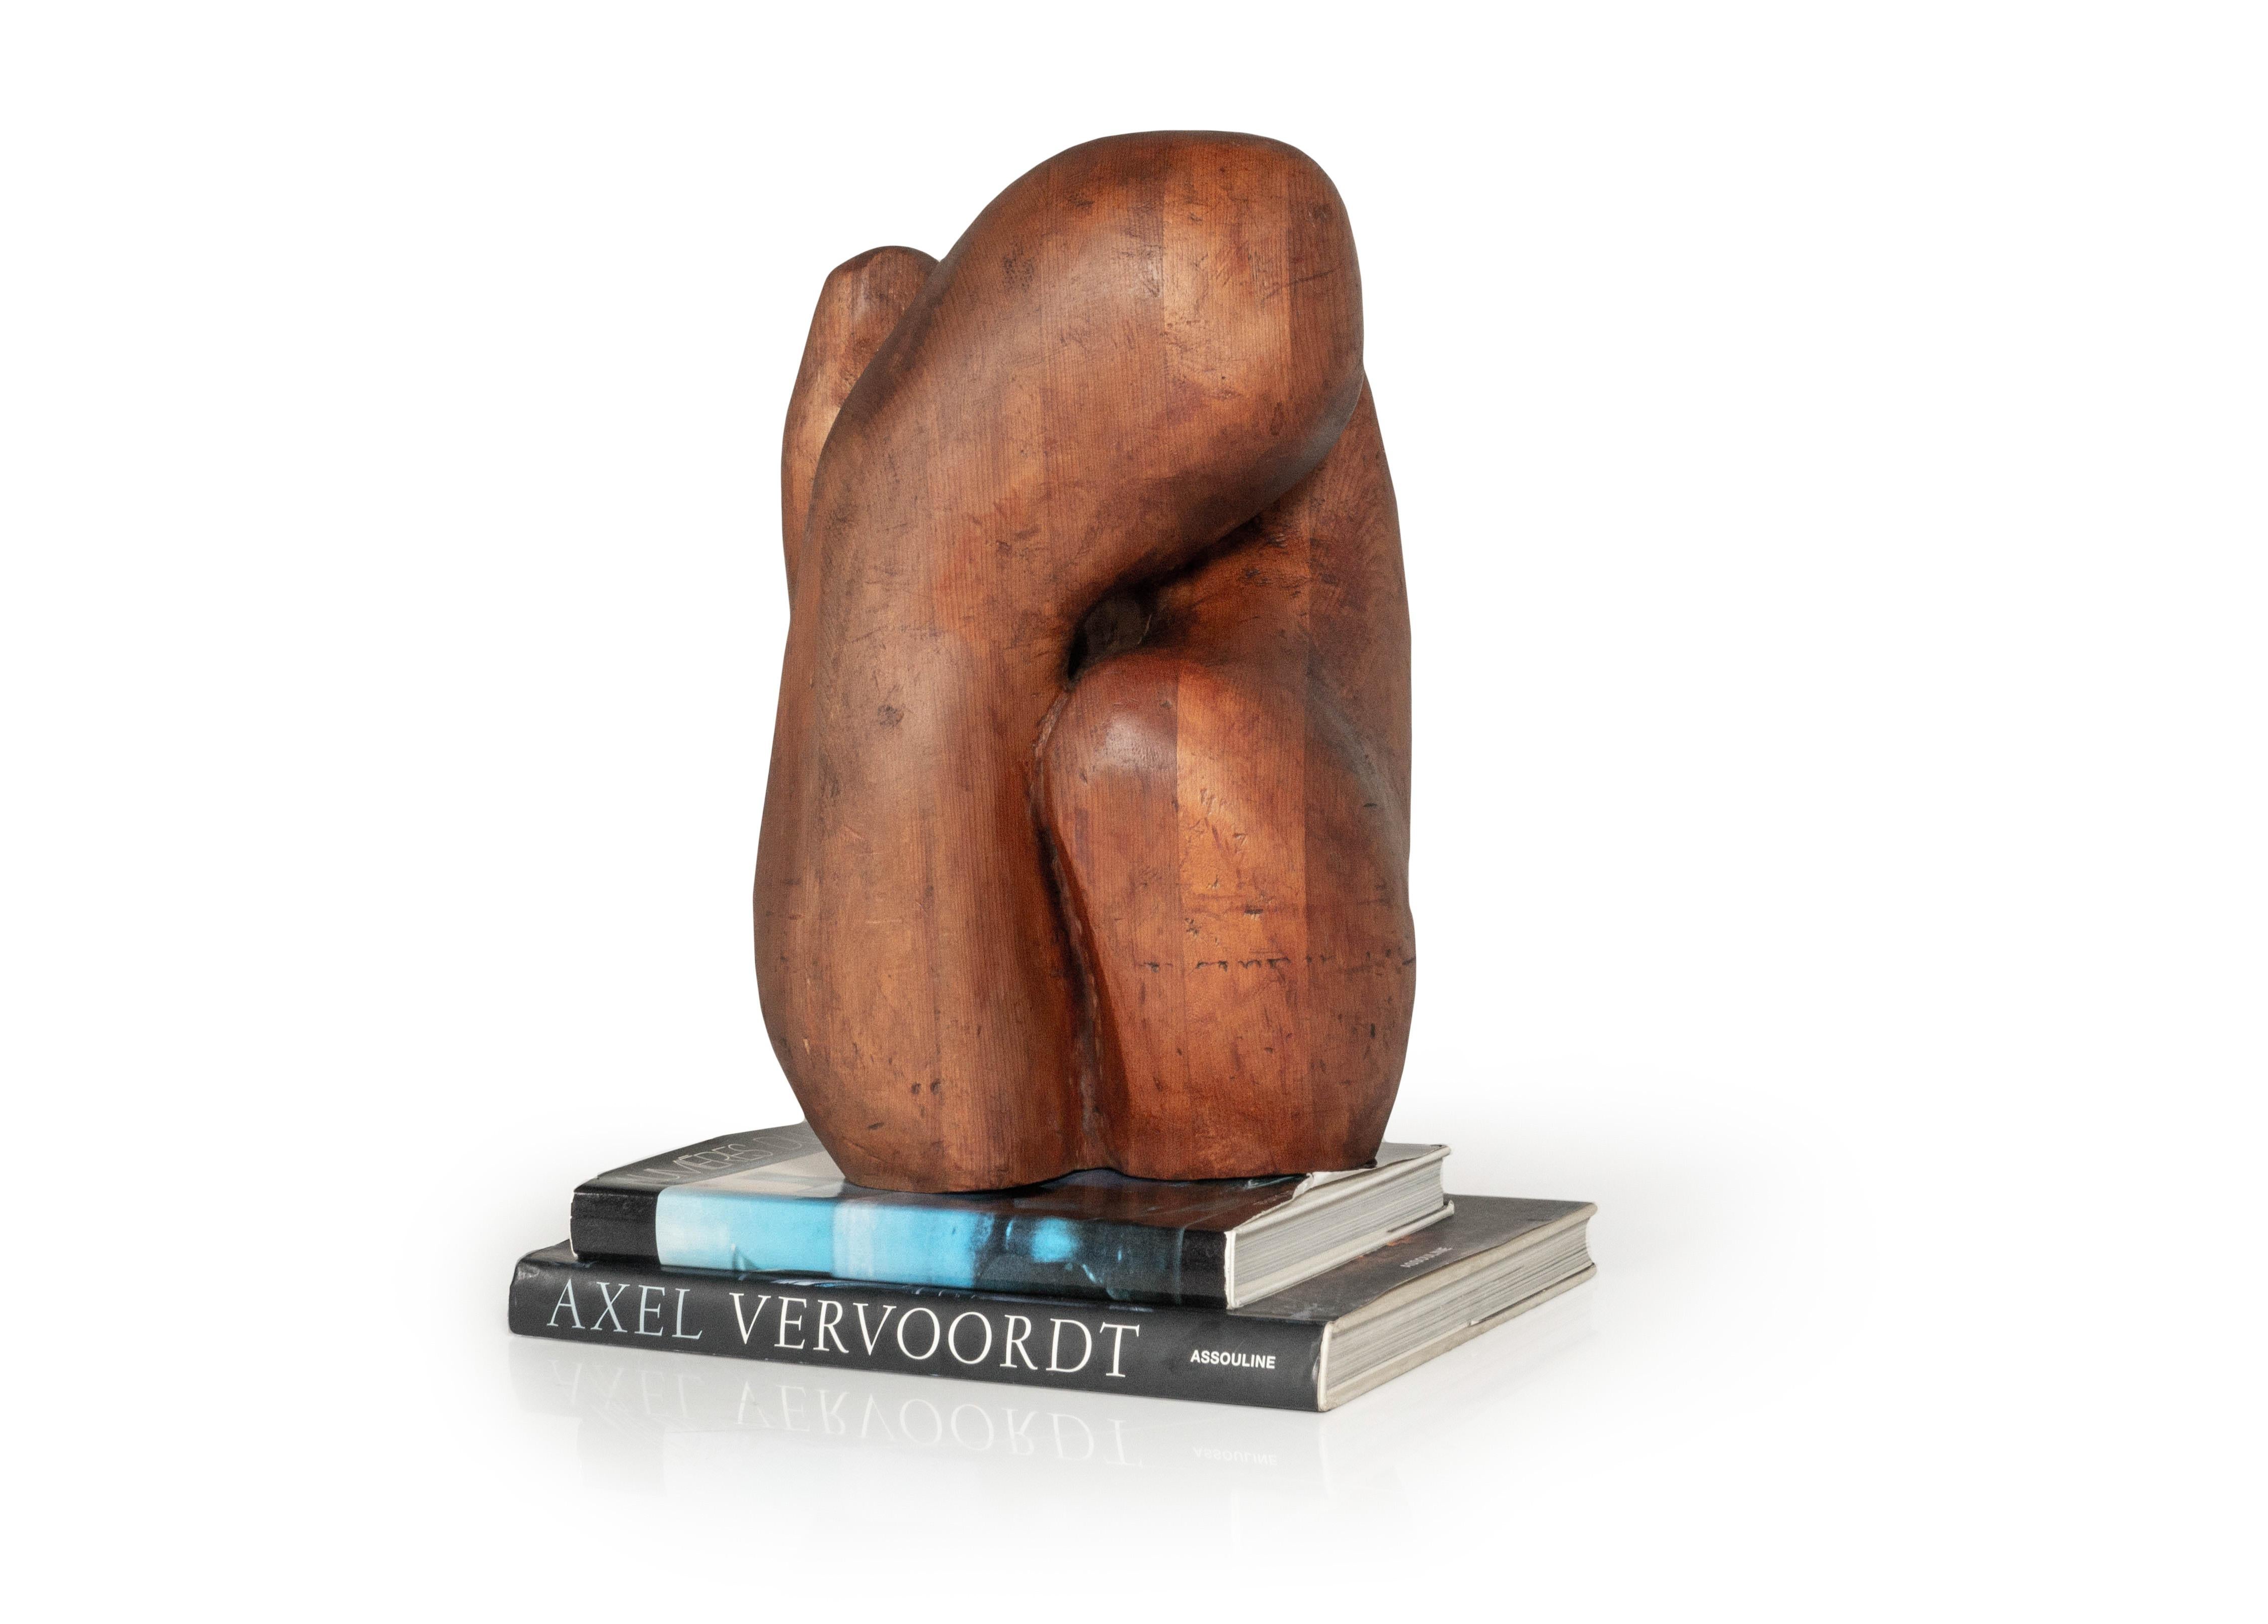 This organic carved biomorphic figure is an excellent choice for incorporating interesting and eye-catching design elements into your home decor. Each piece is carefully and thoughtfully crafted, with smooth lines and organic shapes that will bring